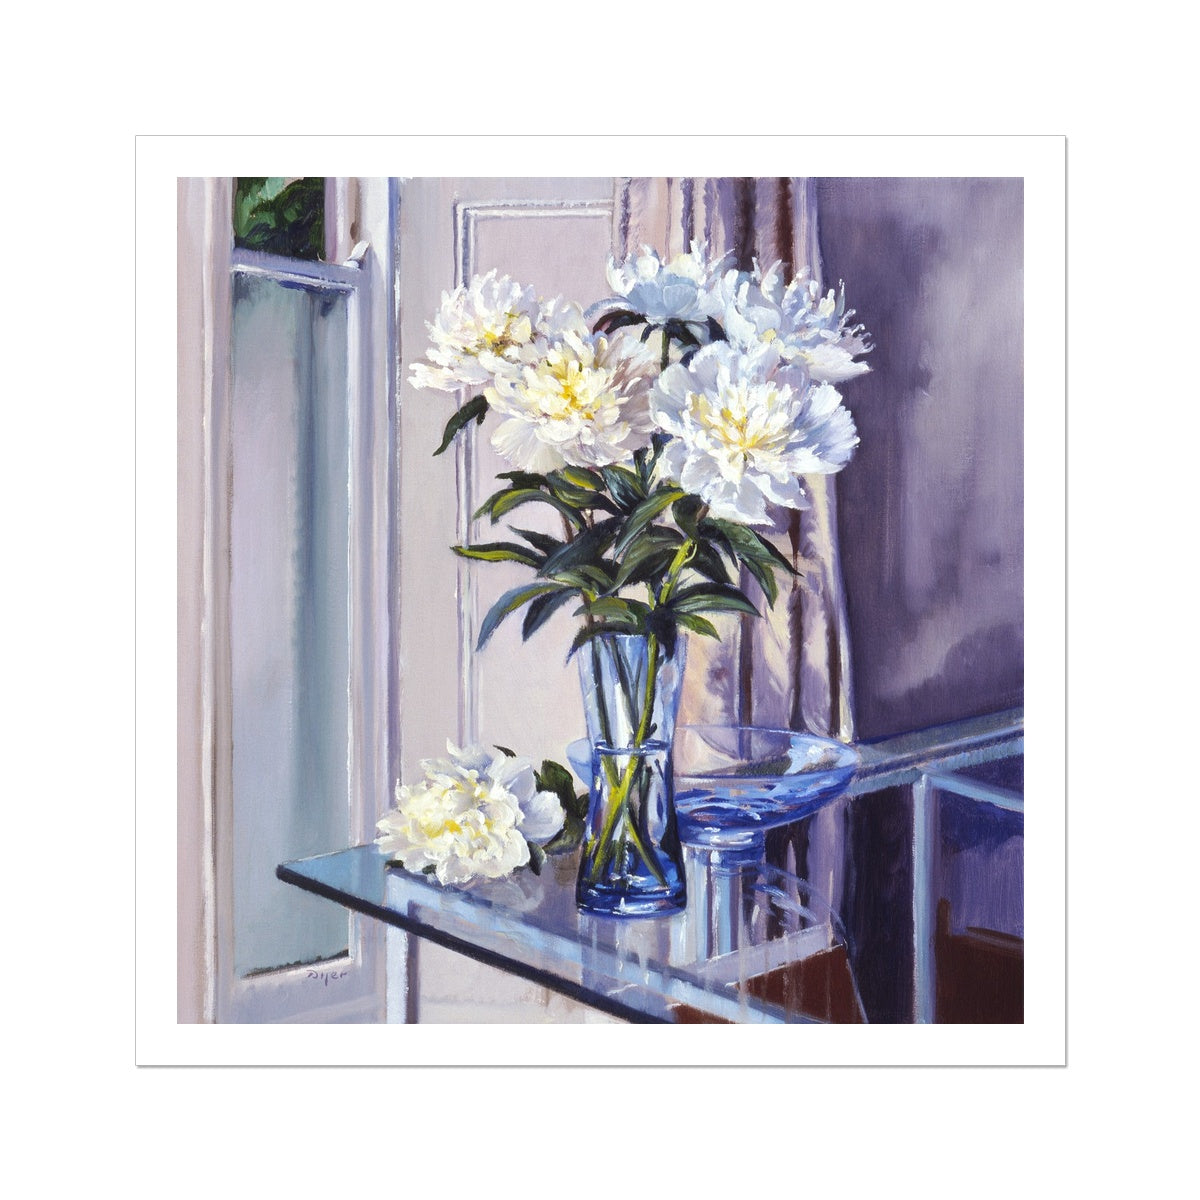 Ted Dyer Fine Art Print. Open Edition Cornish Art Print. &#39;White Peonies in a Blue Vase&#39;. Cornwall Art Gallery